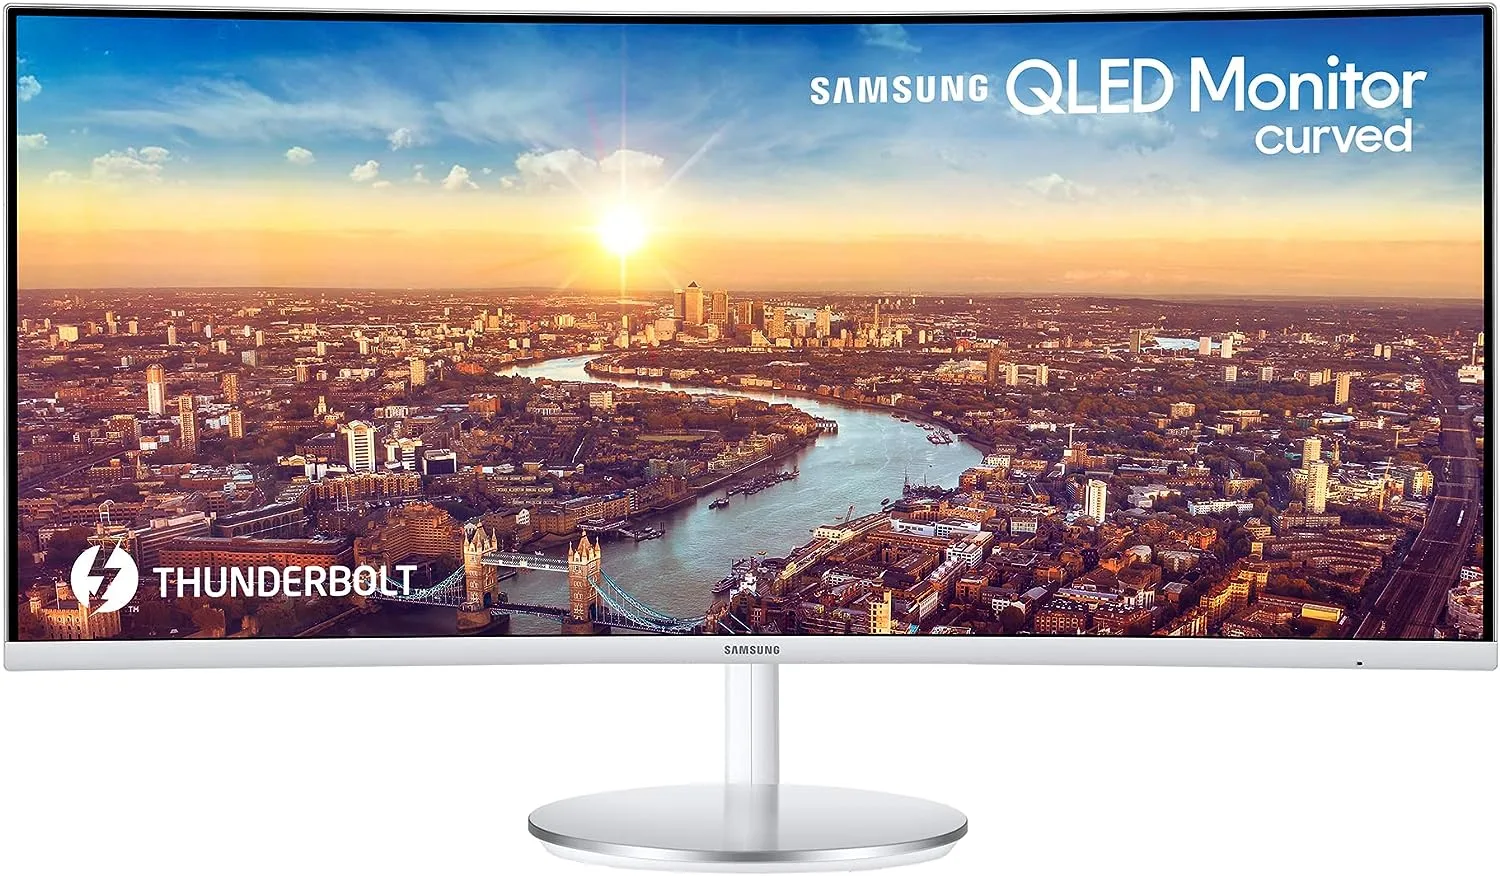 Samsung Curved Monitor C34J791WTP 34″ VA Panel QLED Ultra WQHD Resolution AMD FreeSync Response Time 4ms Response Rate 100Hz Fresh Rate White Silver Review